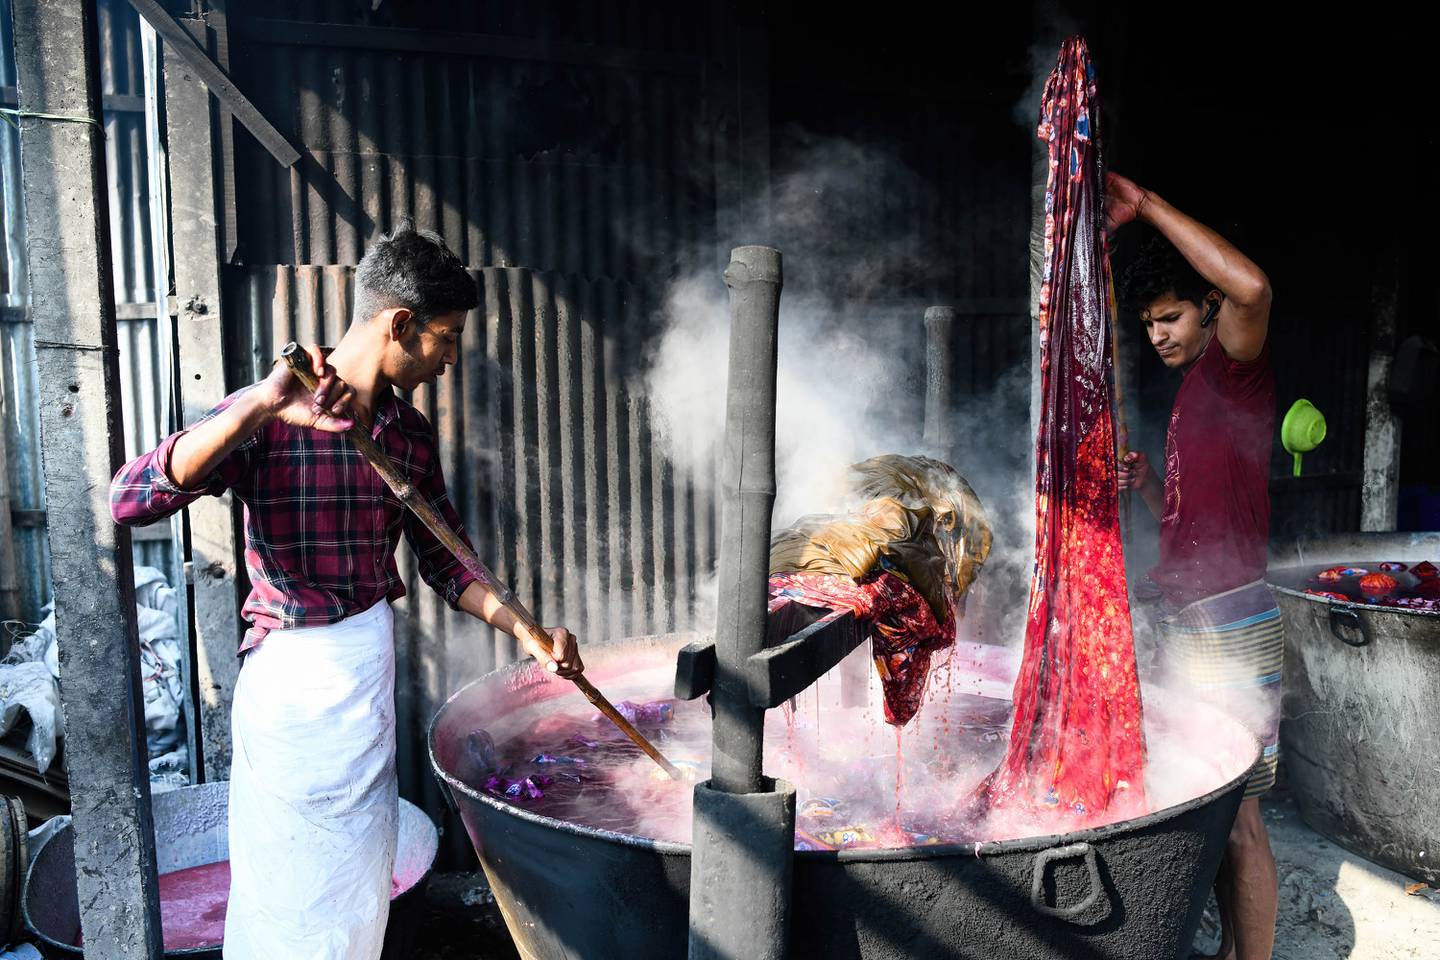 Workers at a dyeing factory in Bangladesh. SOPA Images/LightRocket via Getty Images